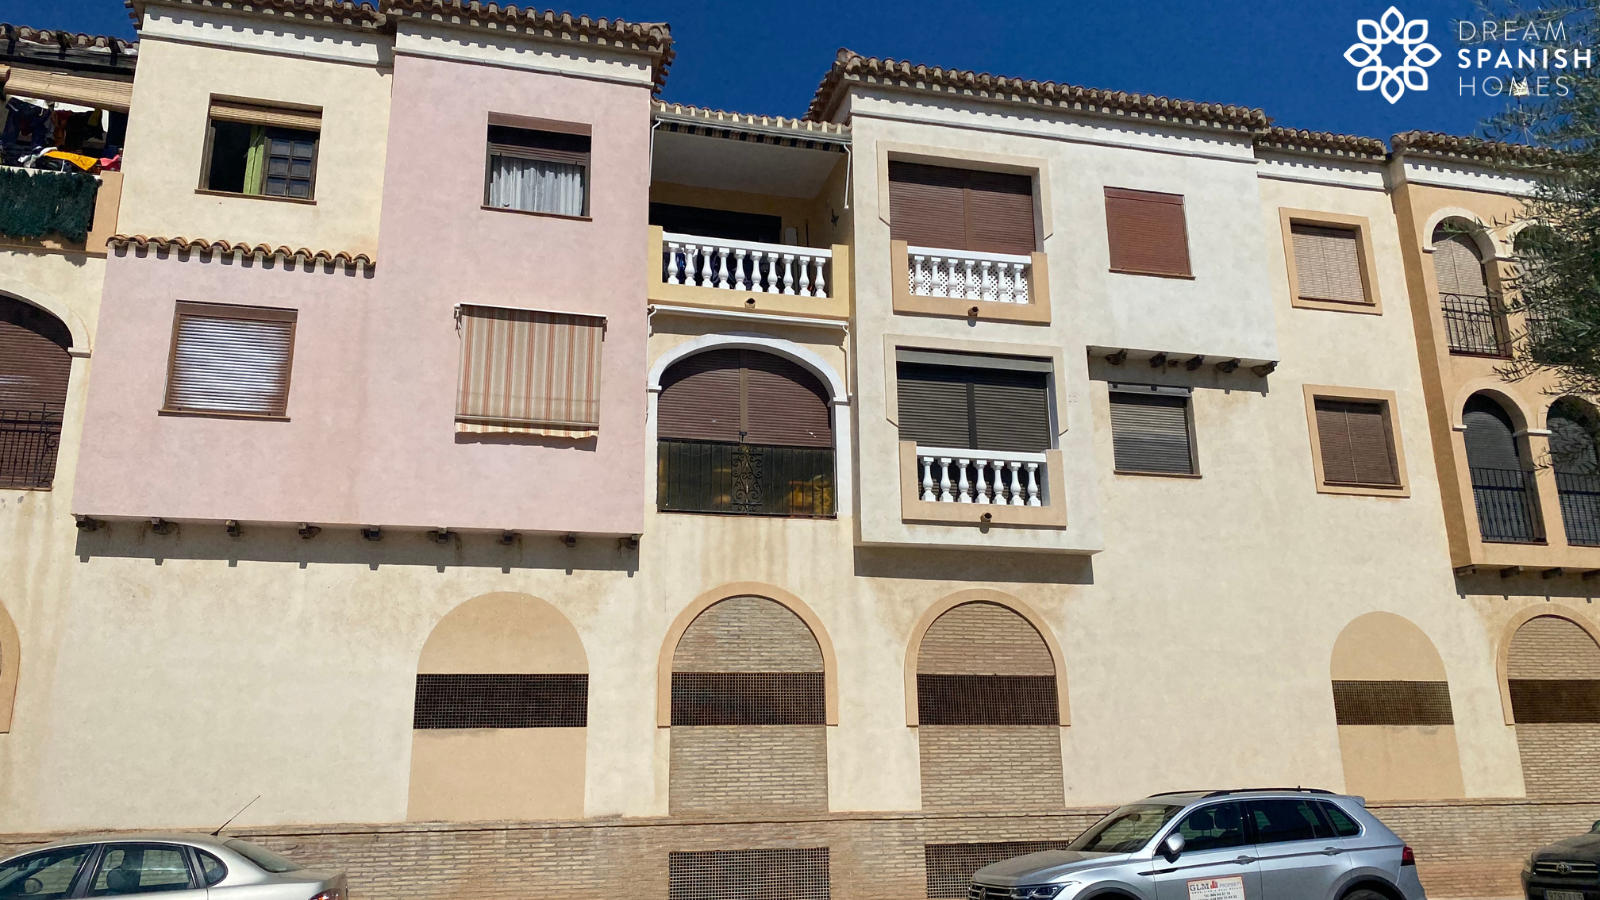 Apartment 2 Bedrooms, 1 Bathroom Including Parking 100m From The Beach